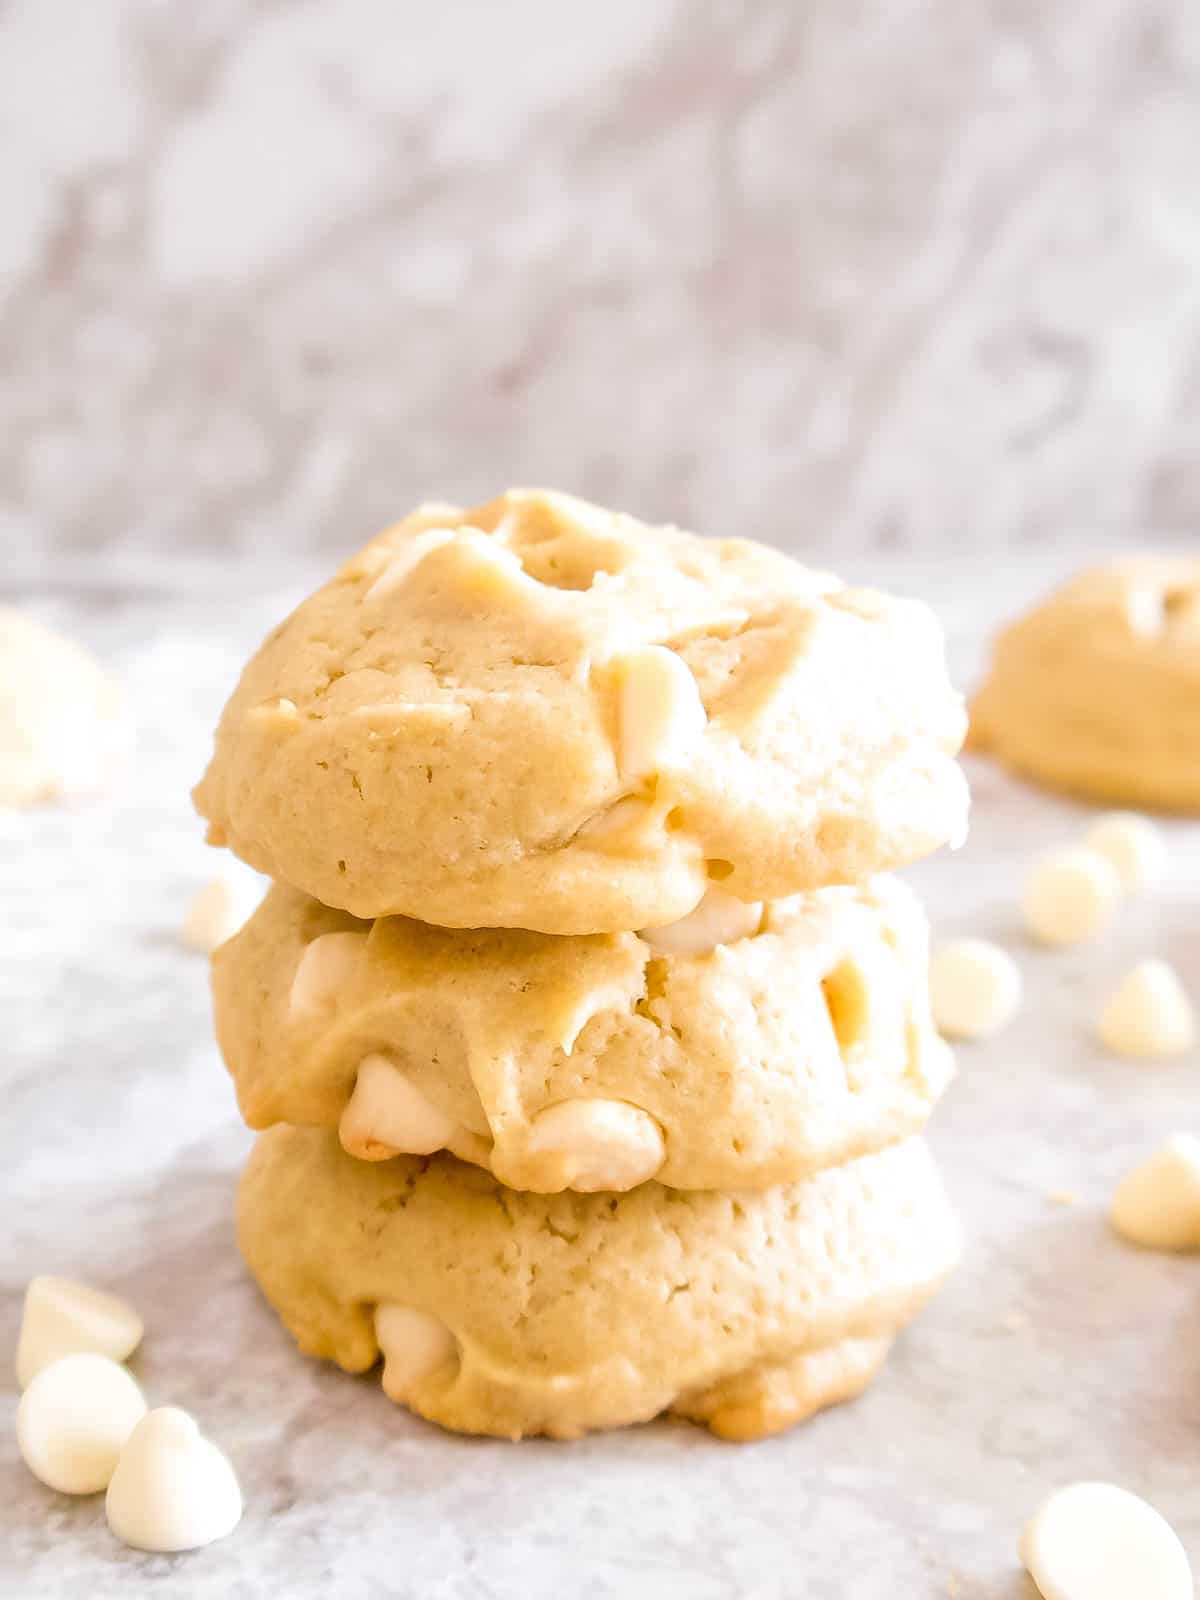 A stack of 3 white chocolate chip cookies.